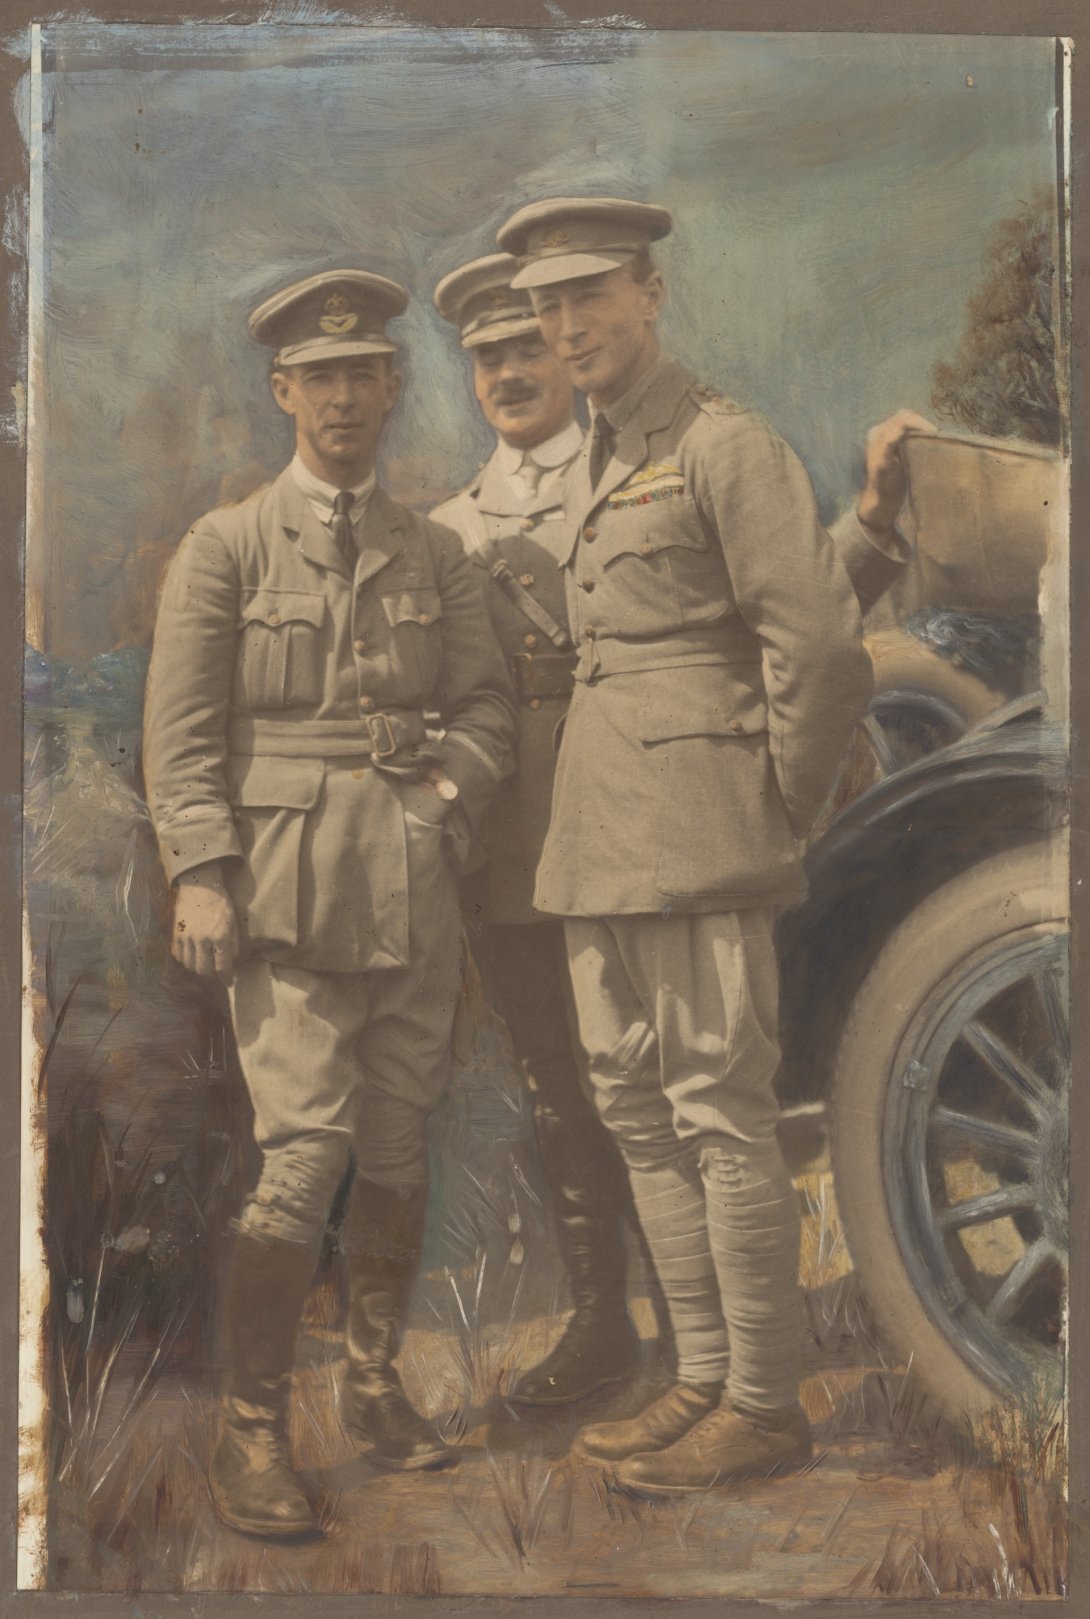 Three men in military uniform, including hats, standing closely together in front of a car. 